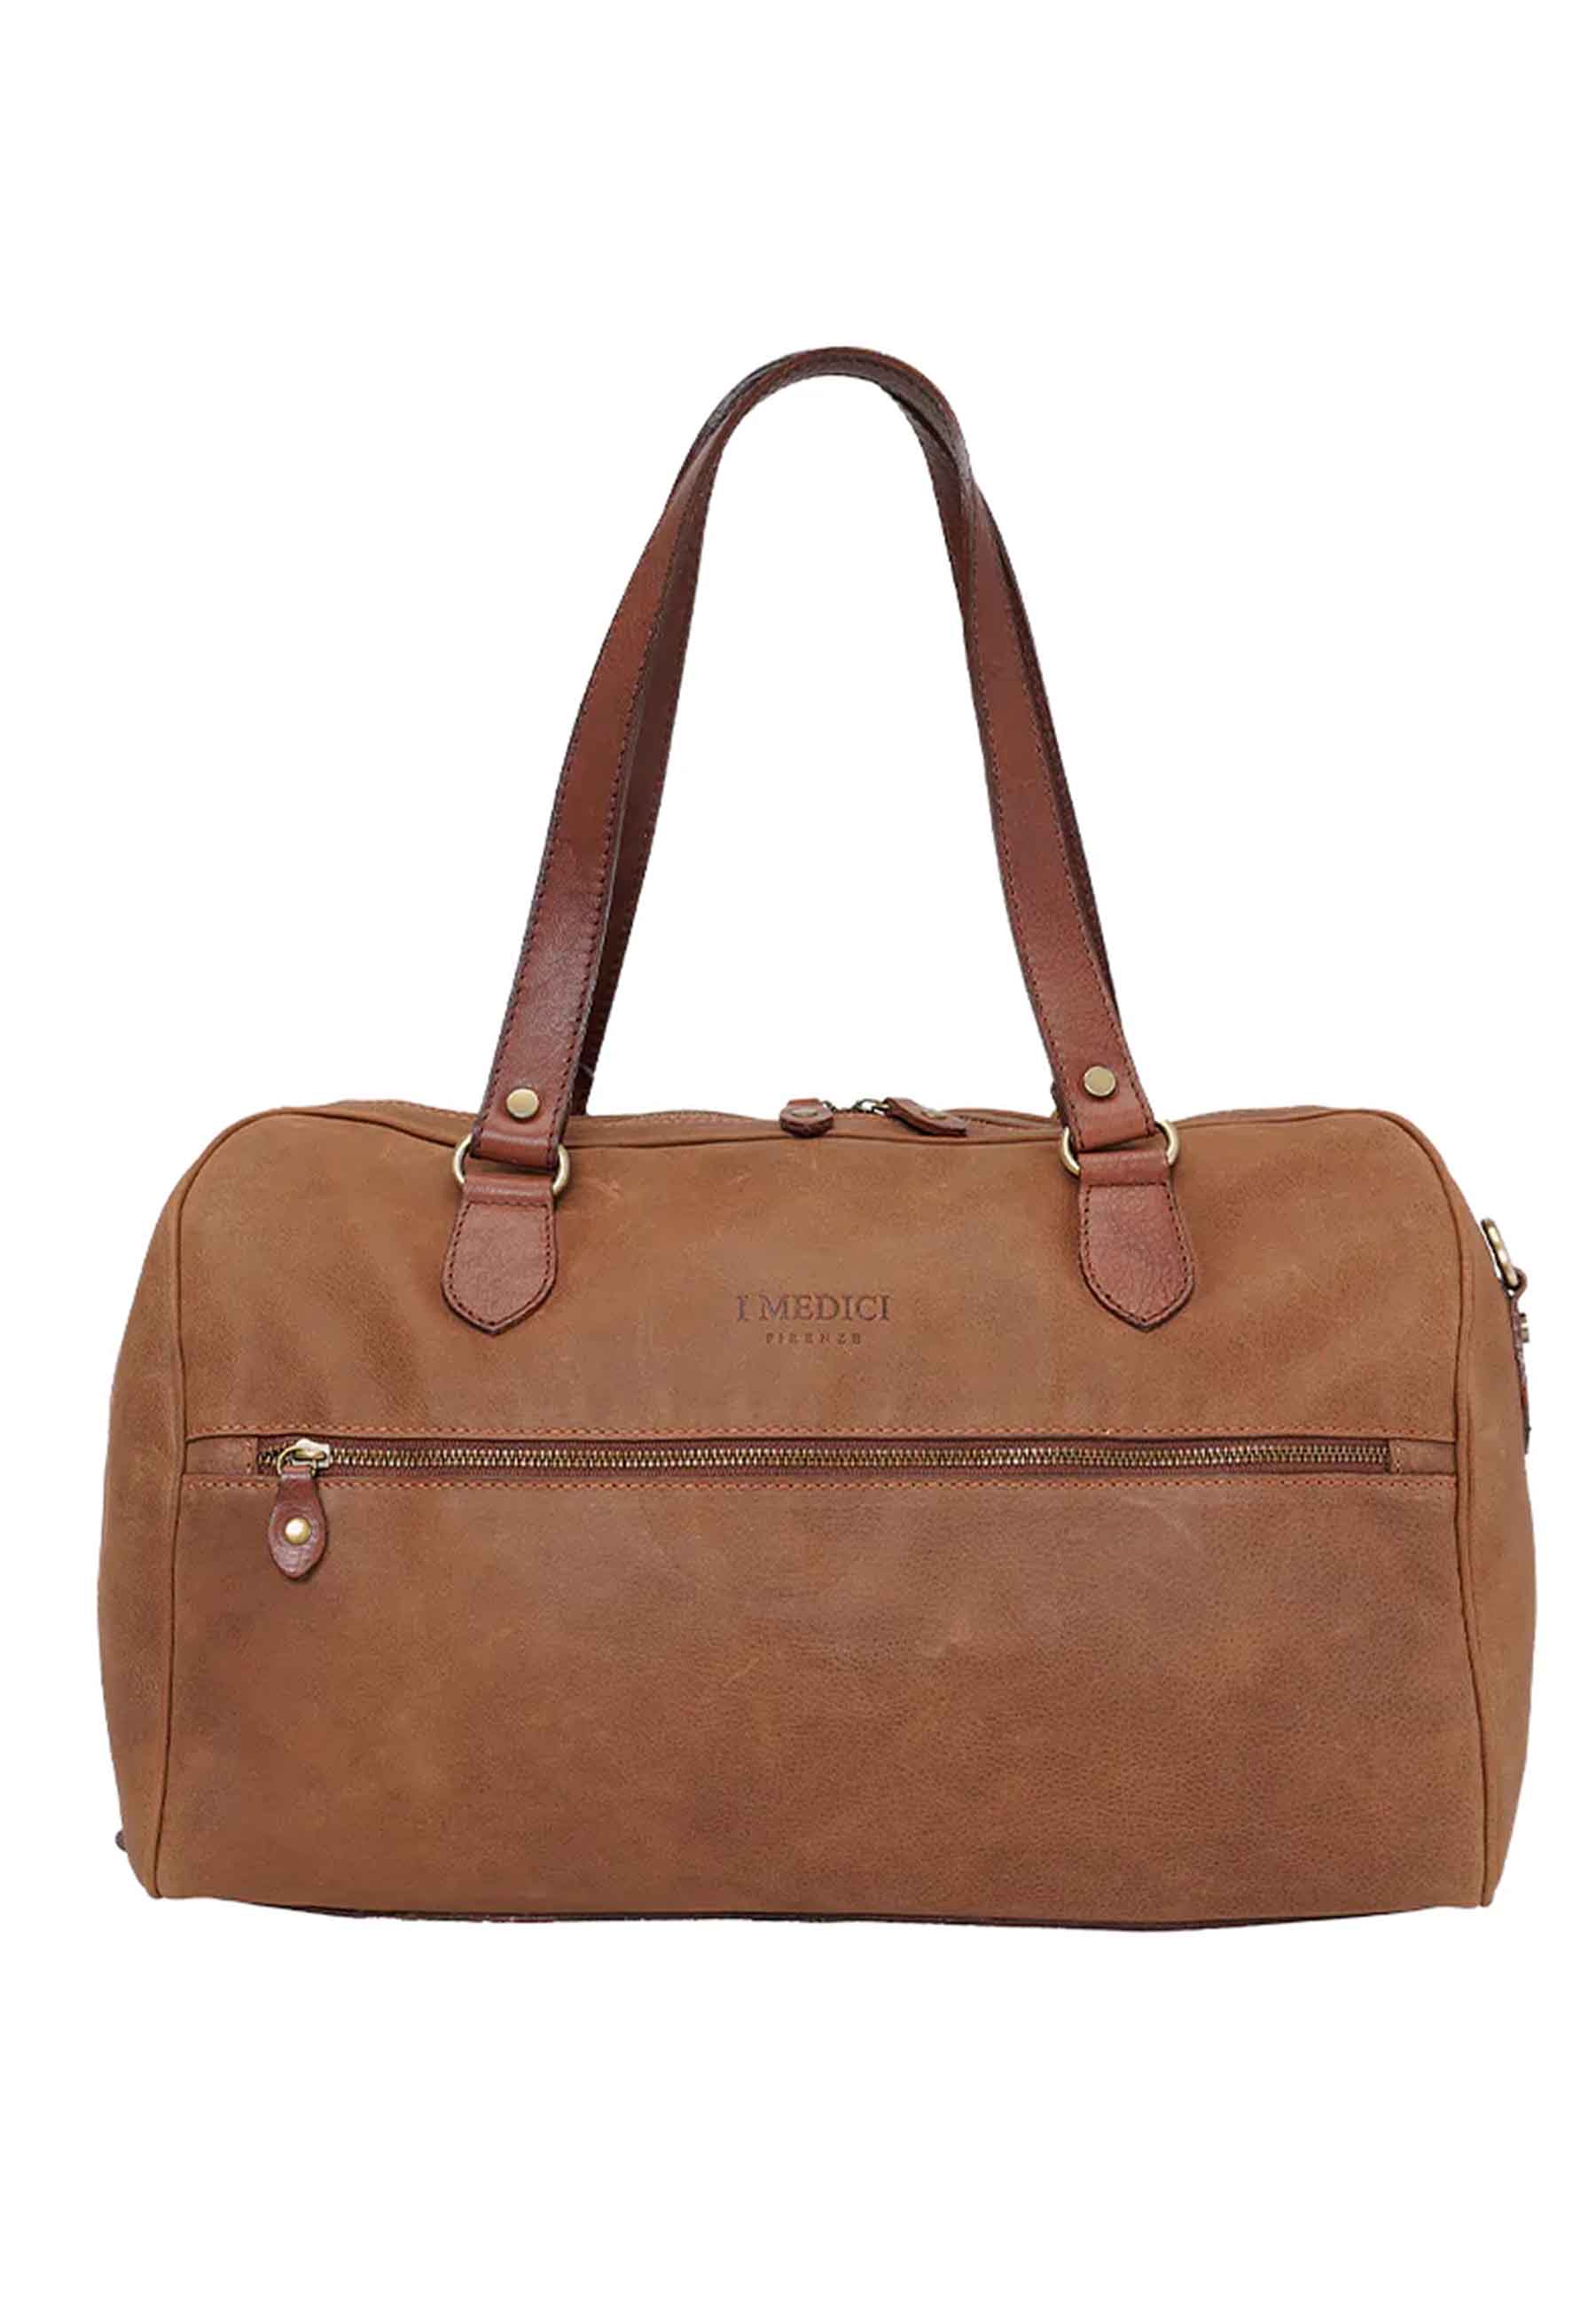 Men's bag in tan leather with long handles